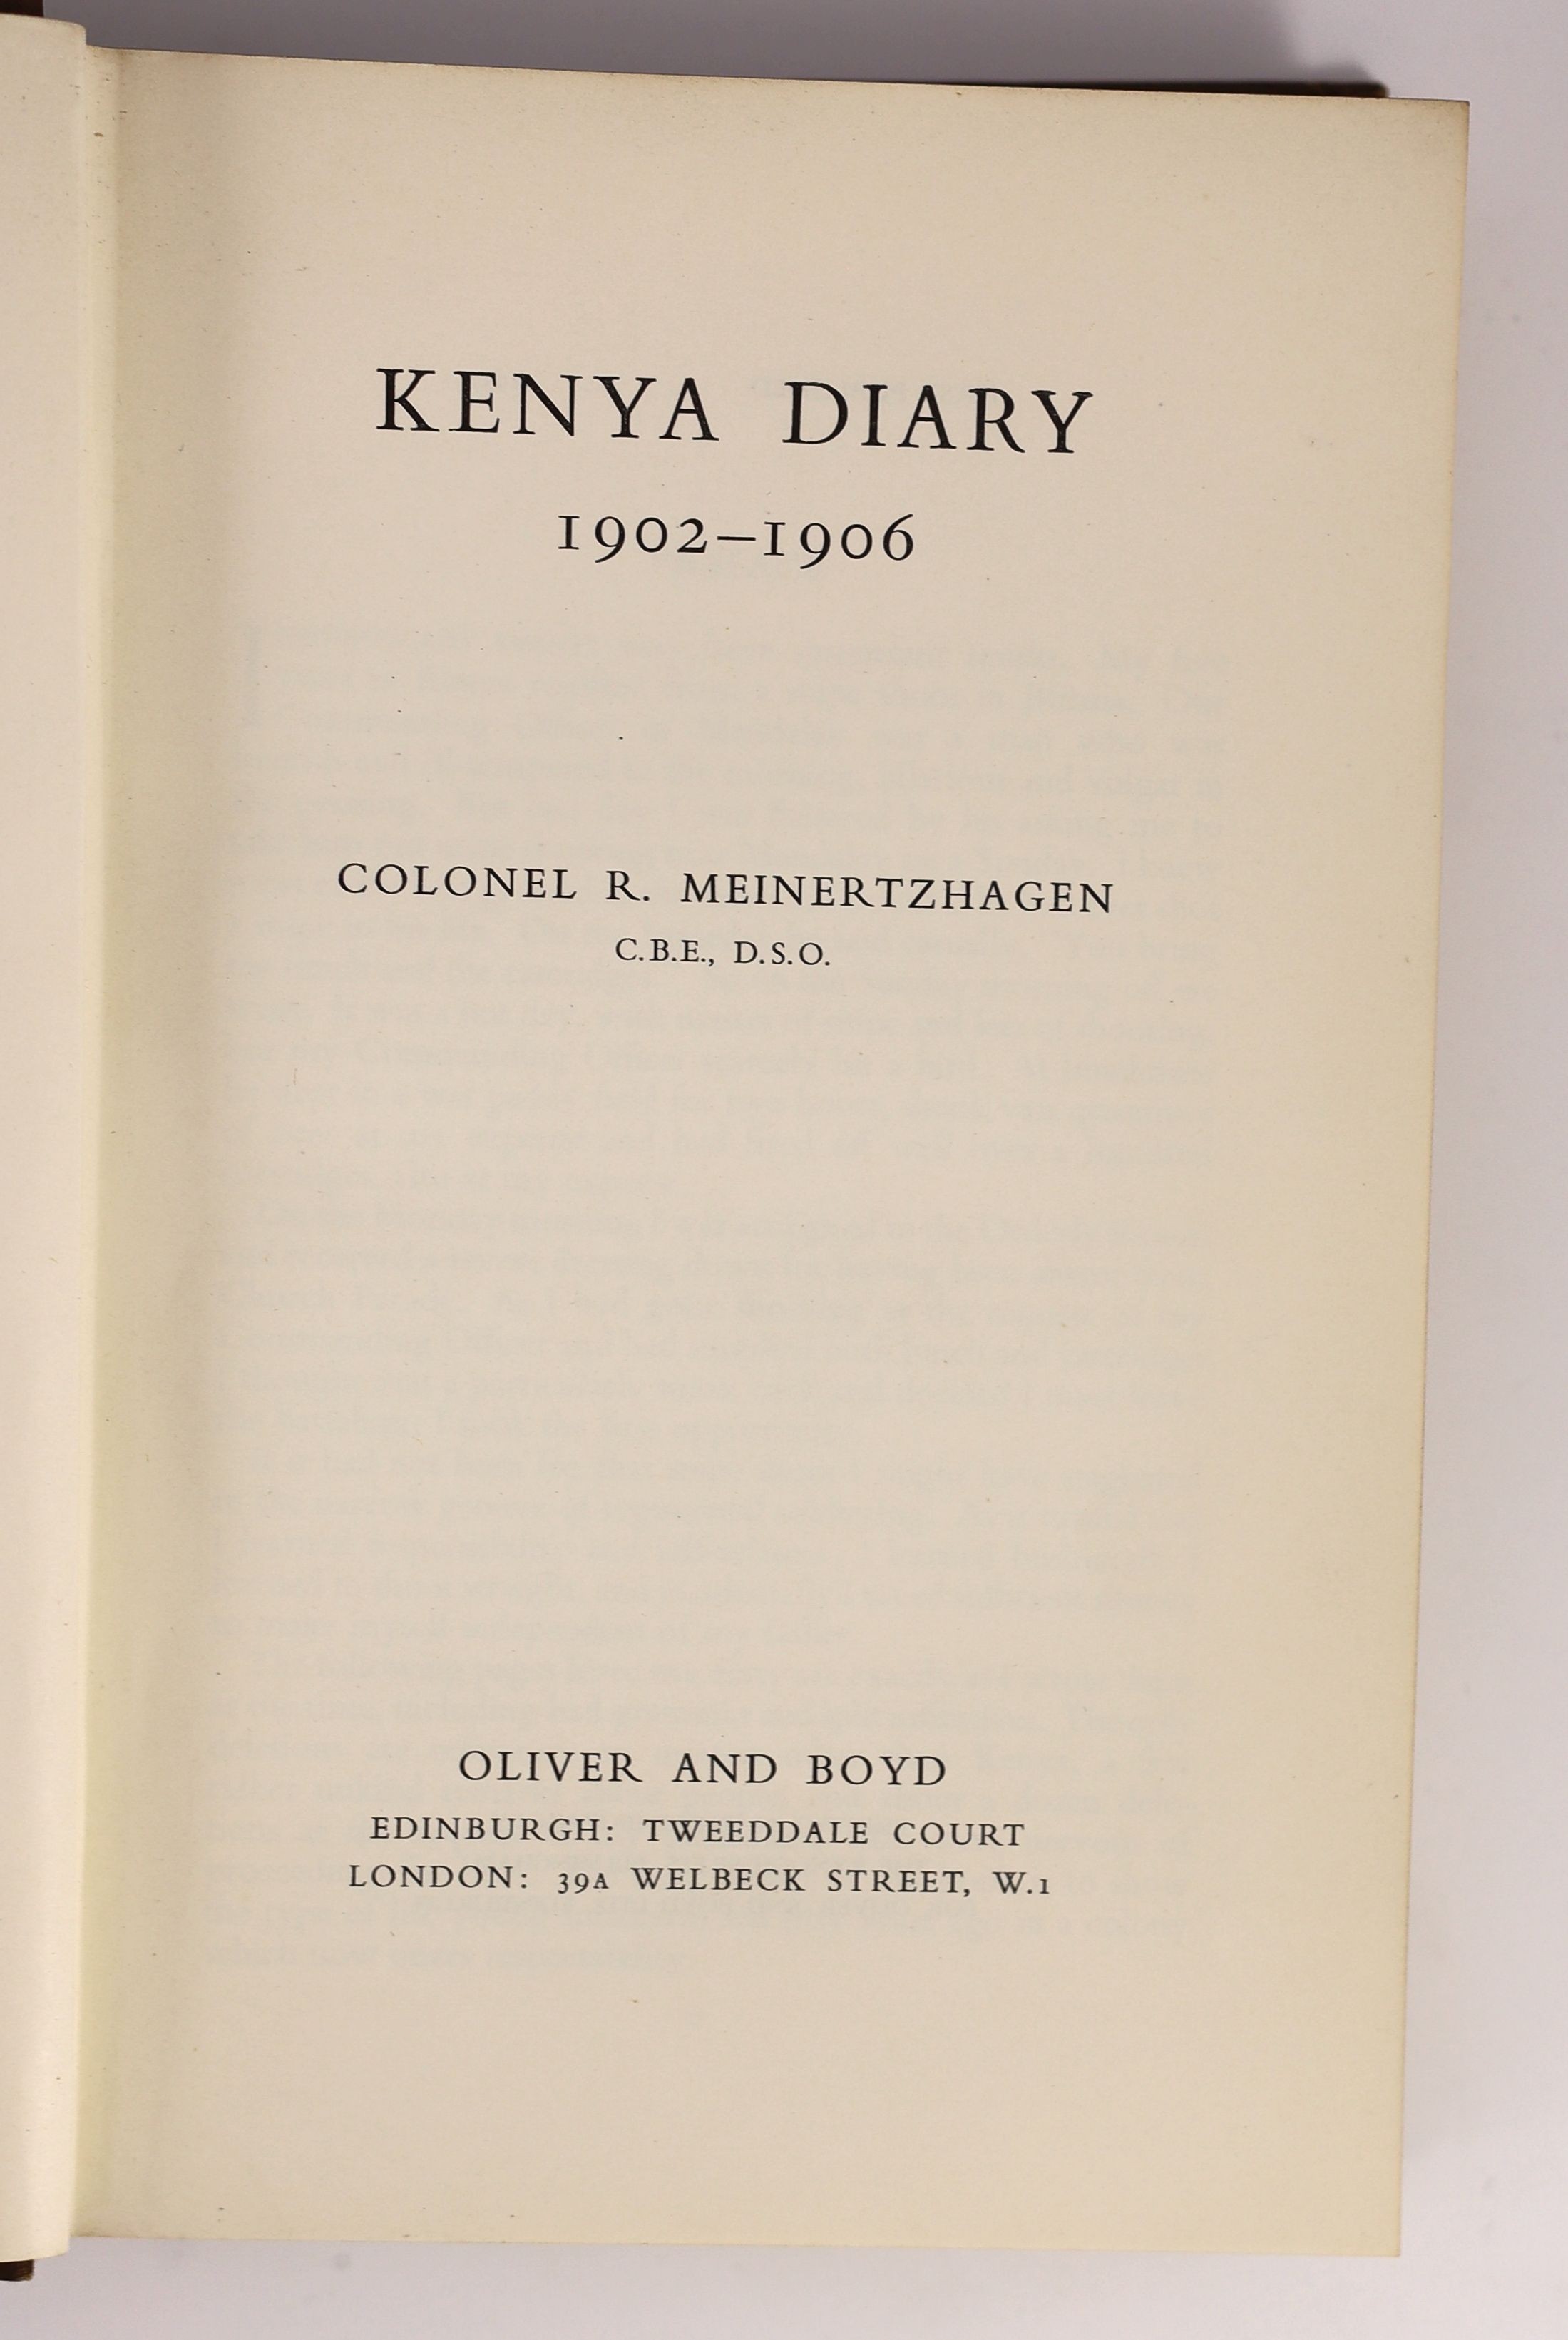 Meinertzhagen, Colonel Richard. Kenya Diary 1902 – 1906. Edinburgh & London, 1957. Original cloth binding rubbed and slightly bent out of shape. * With Meinertzhagen’s bookplate inside the front cover, Michael Lyell’s pe